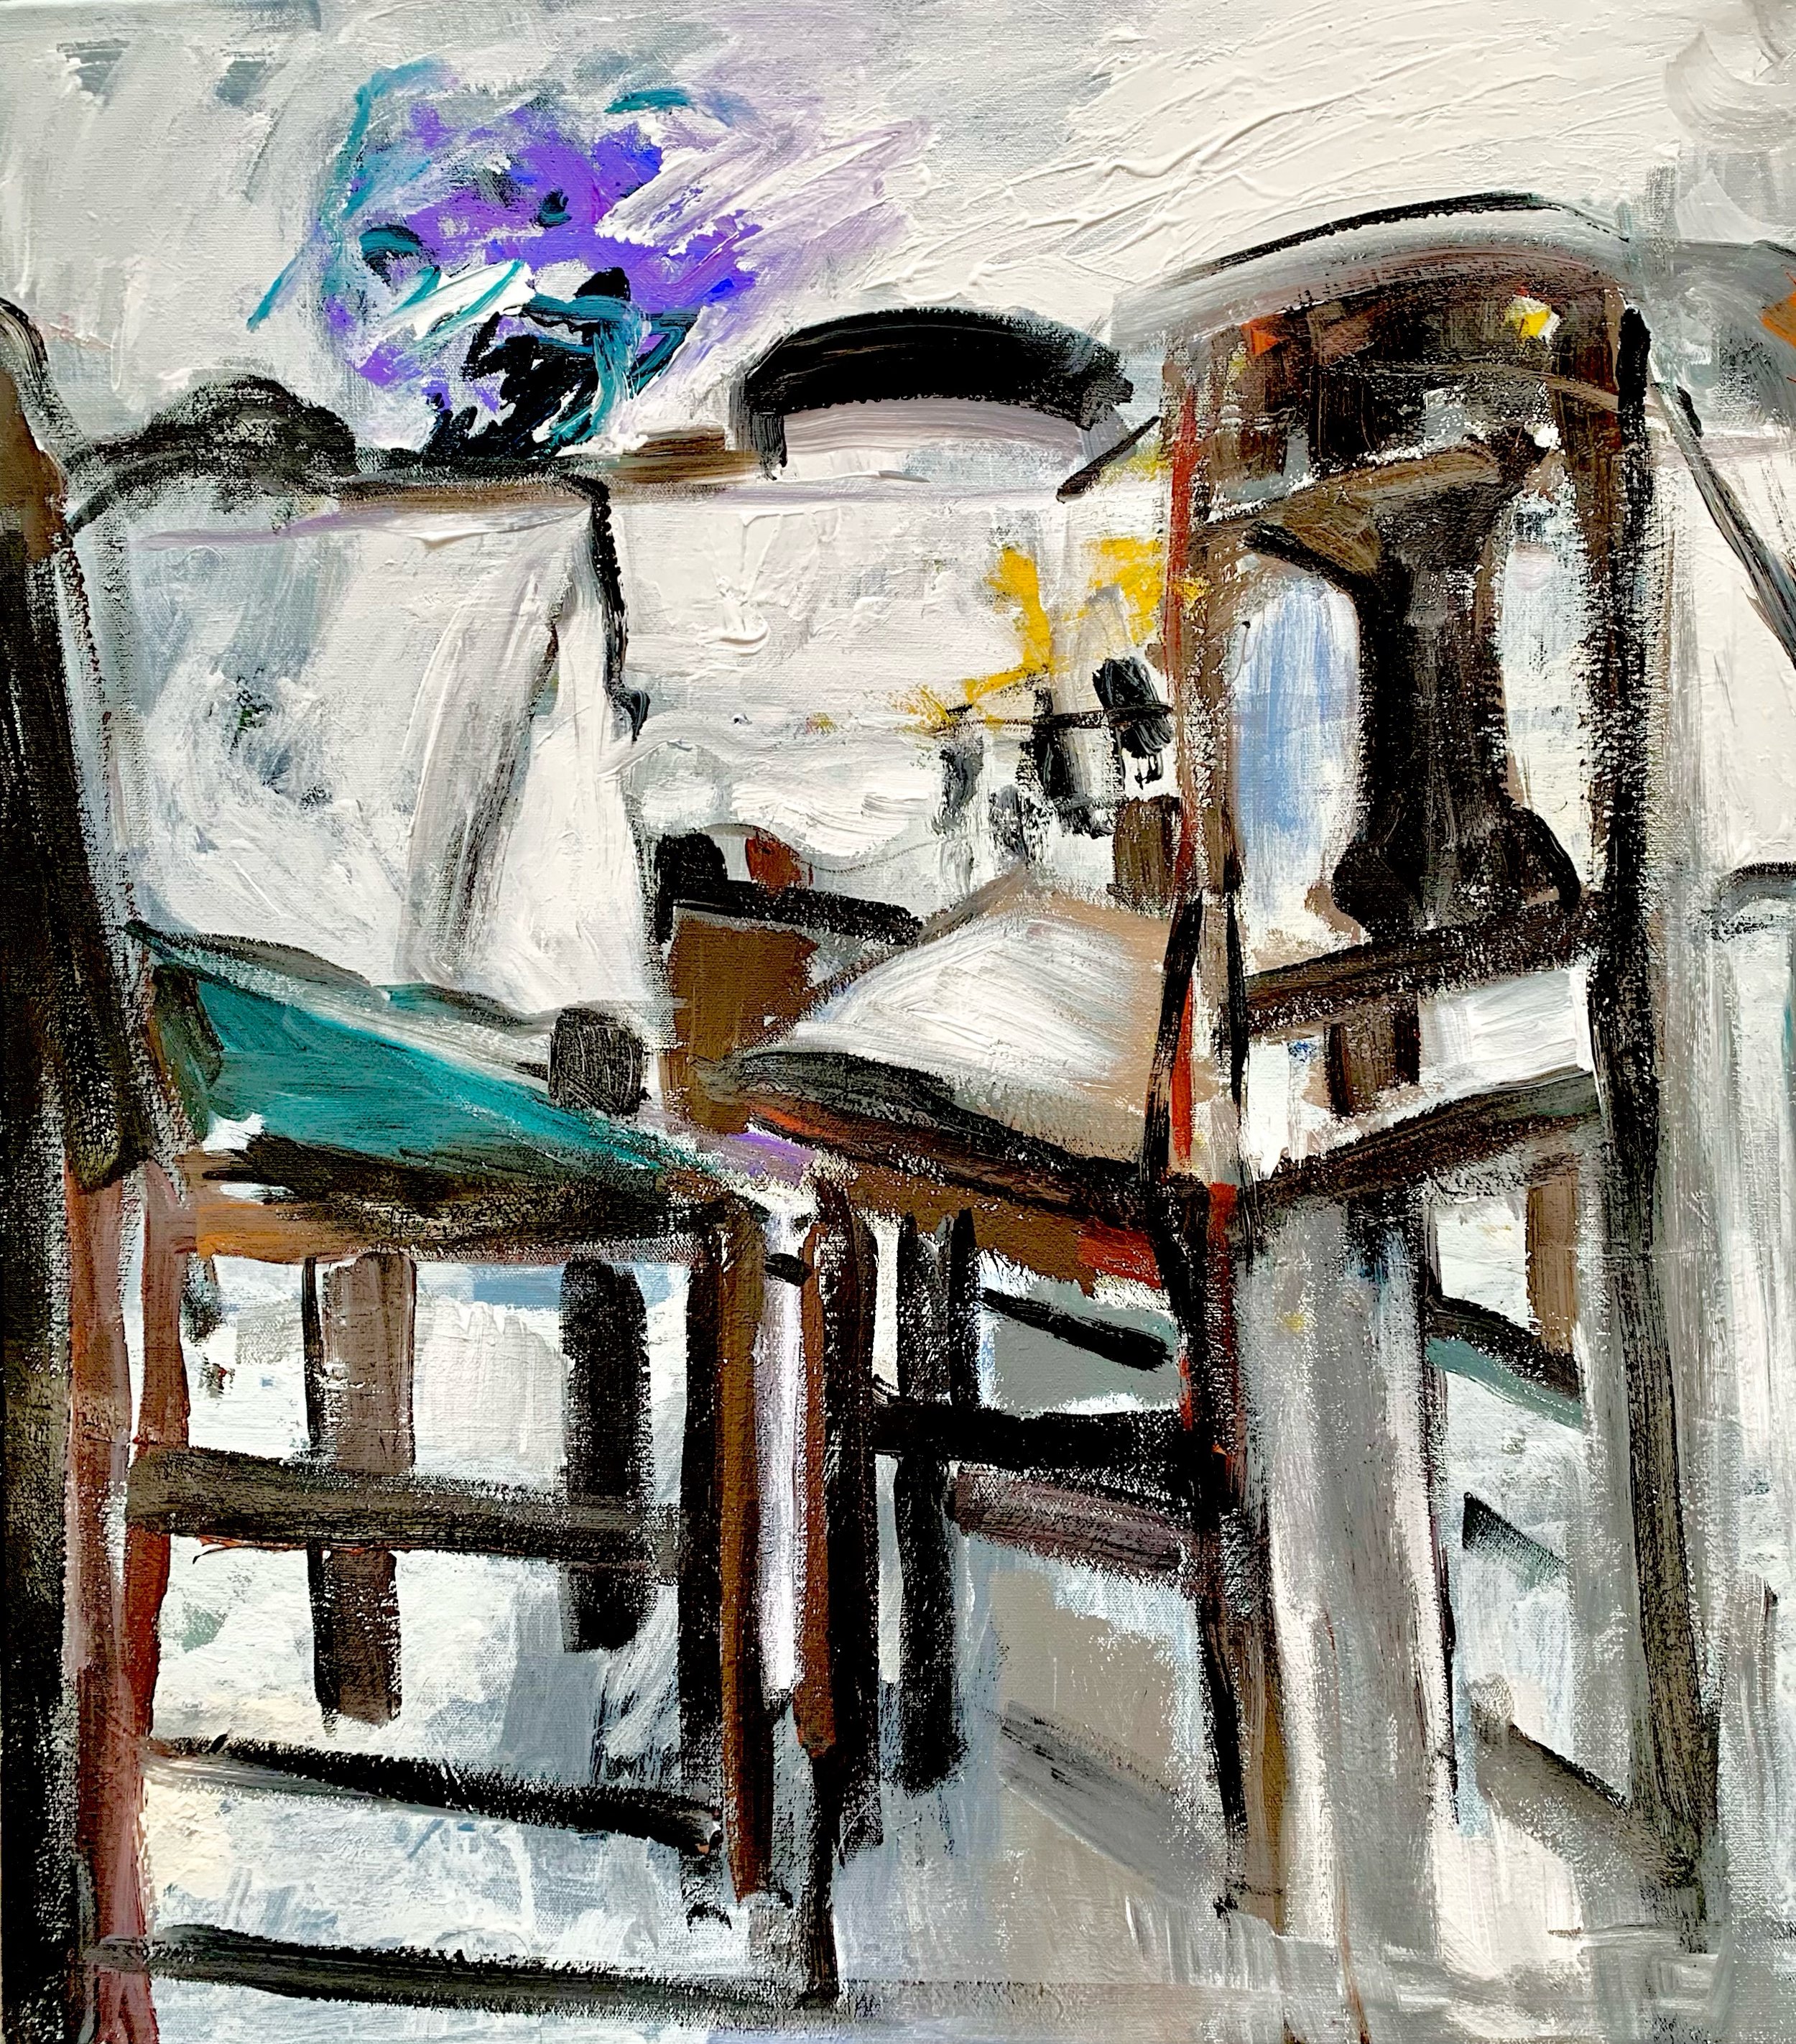 Carmen Marin The Chairs Acrylic on linen 26 by 20 inches (66 by 50 cm) .jpeg